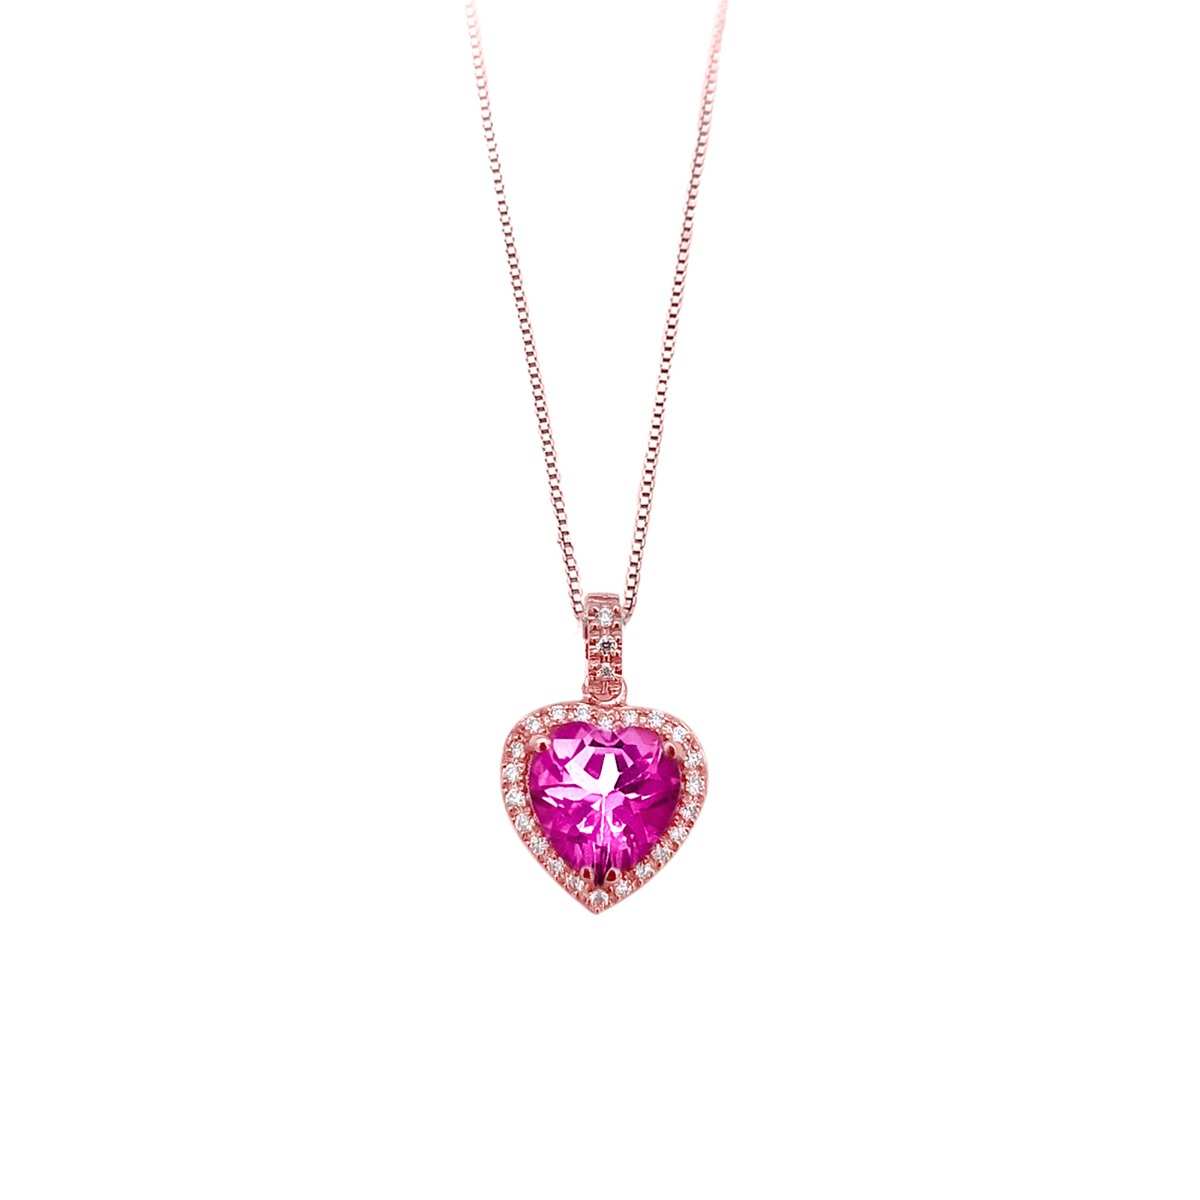 Necklace In 18kt Rose Gold And Diamonds With Heart-Shaped Pink Topaz